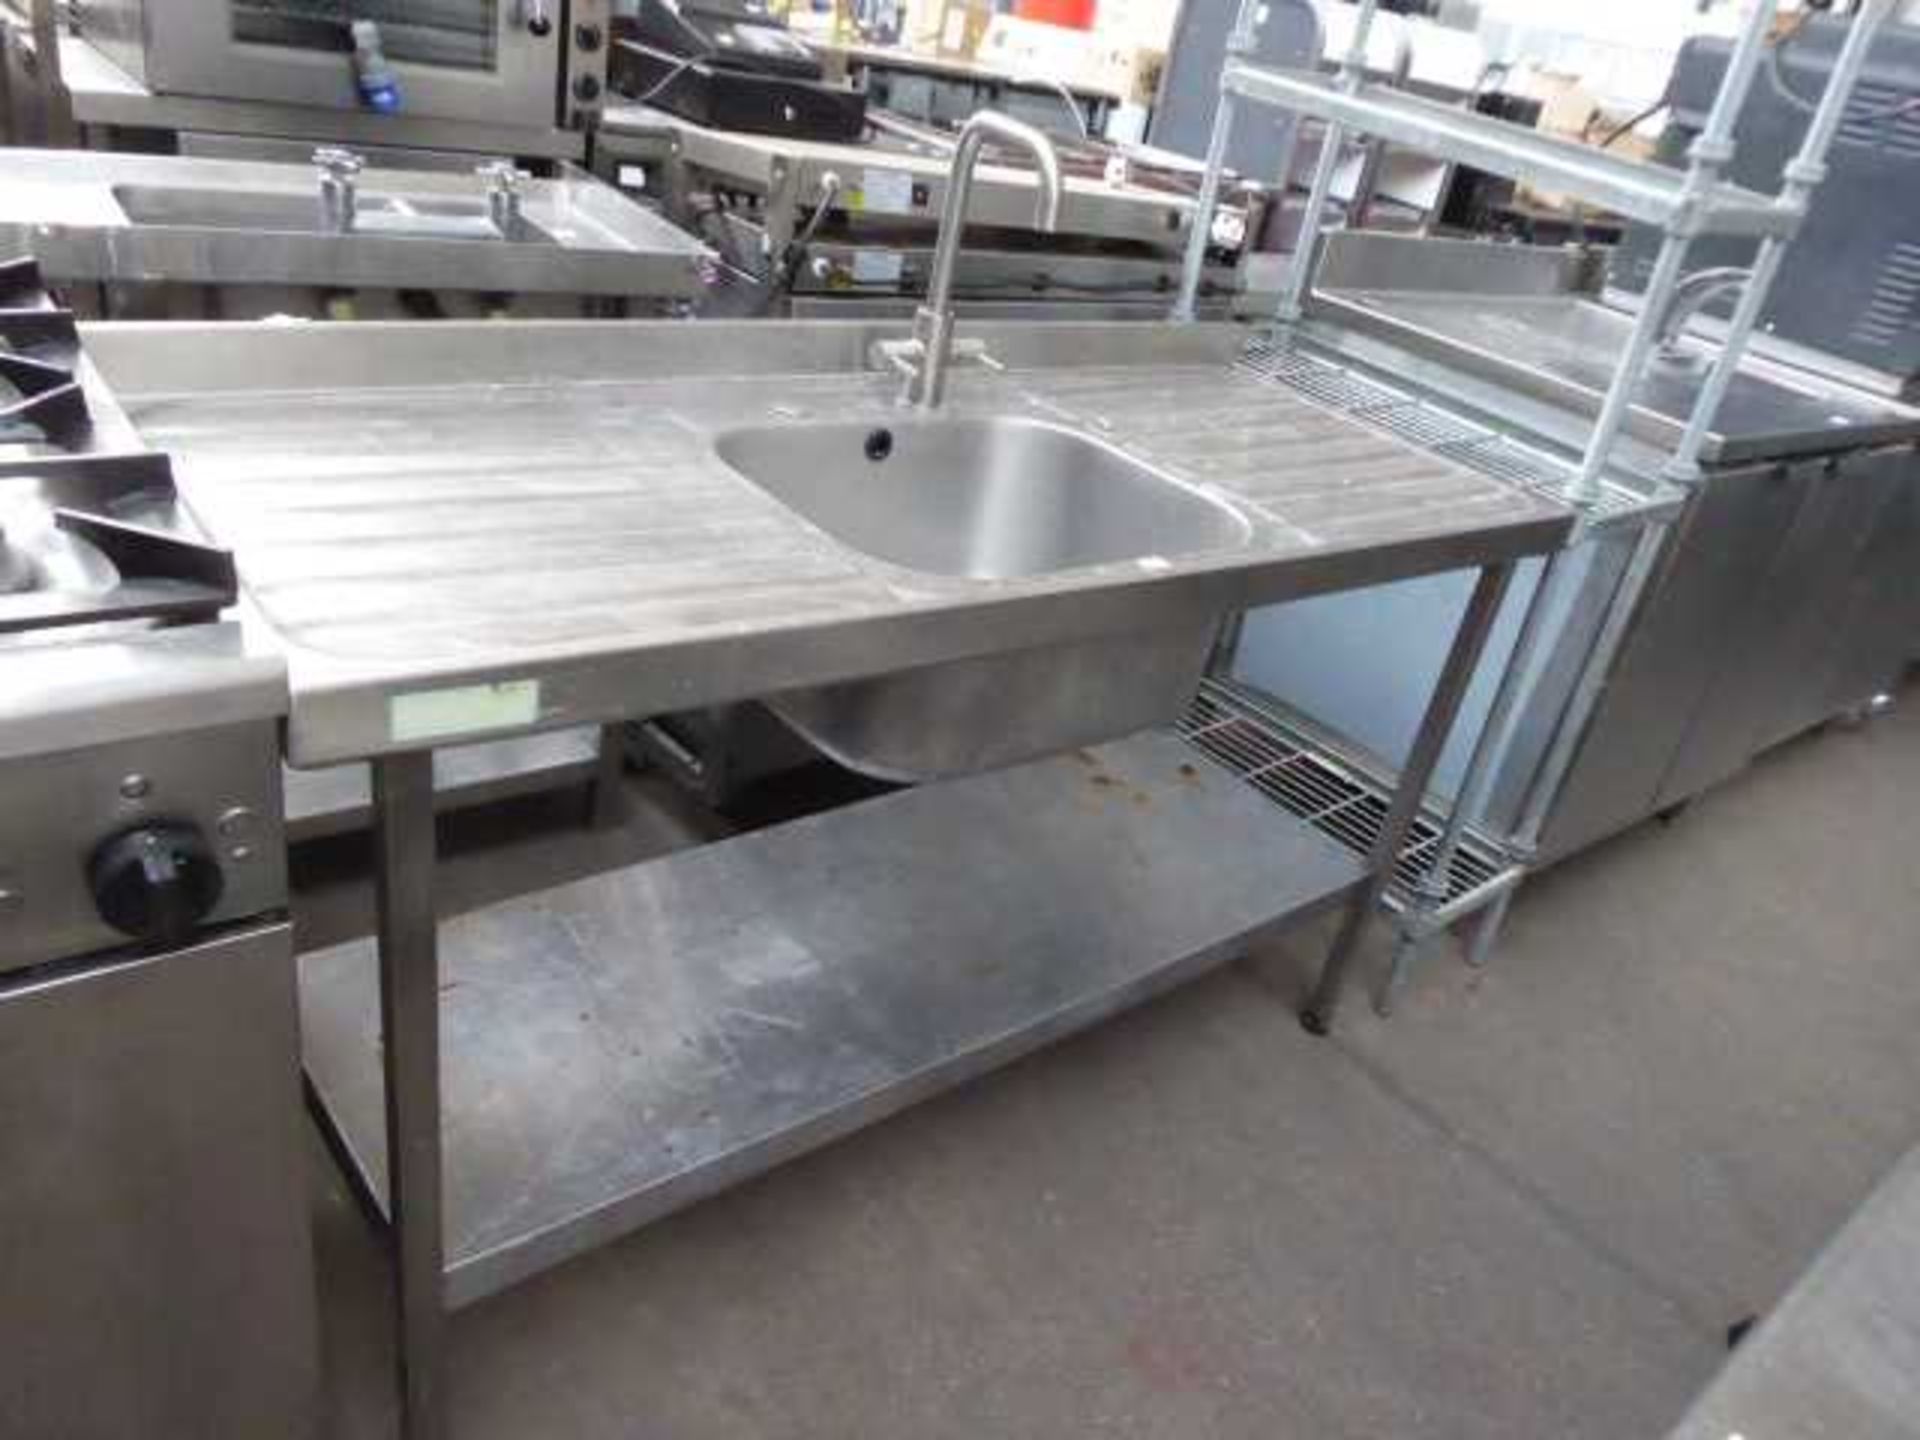 150cm stainless steel preparation table with single bowl, tap set and shelf under